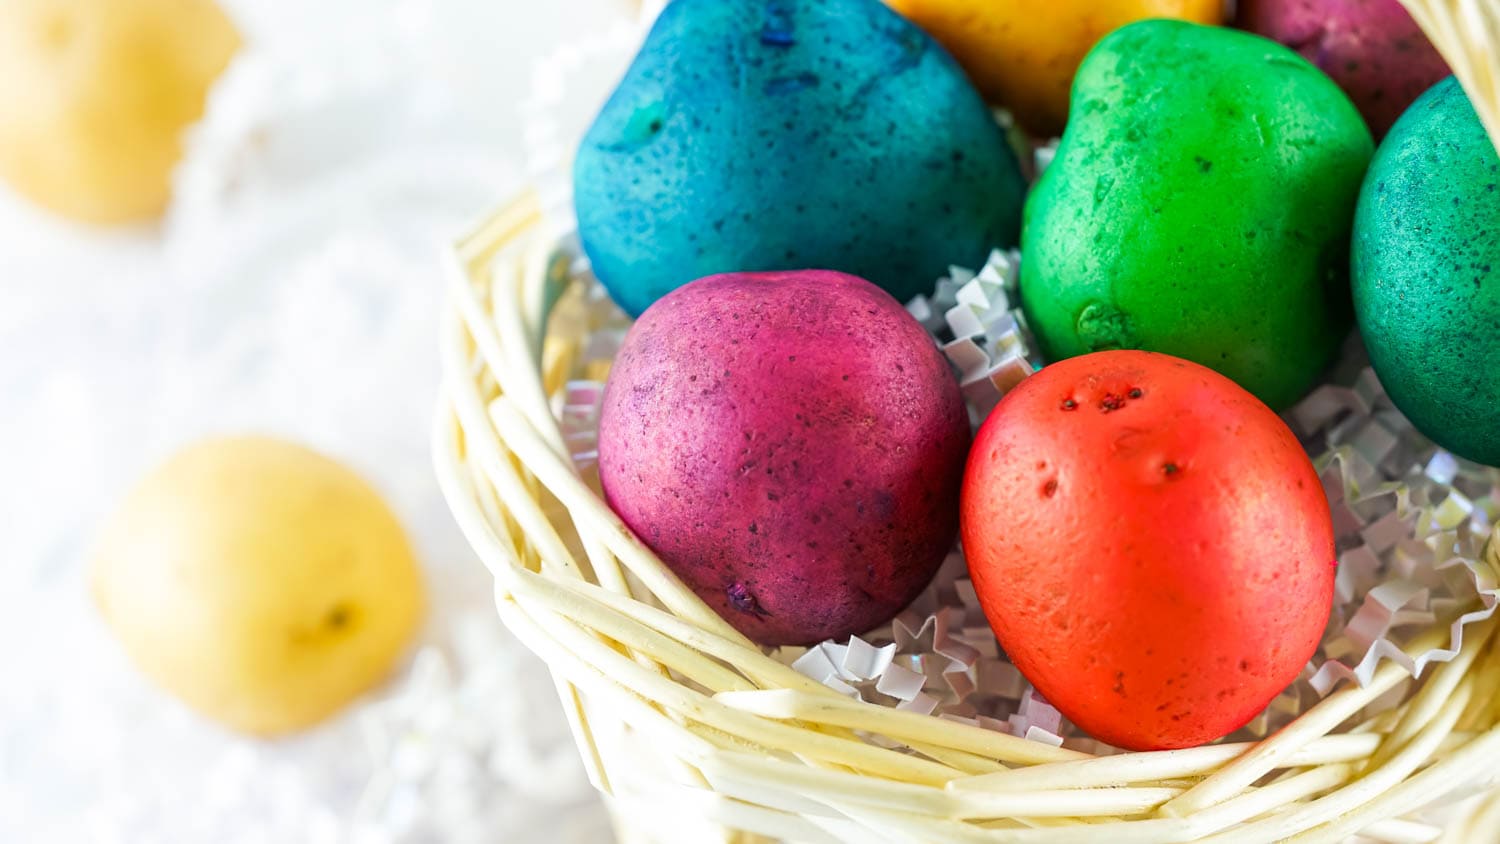 Completed Dyed Egg Potatoes in a Wicker Basket